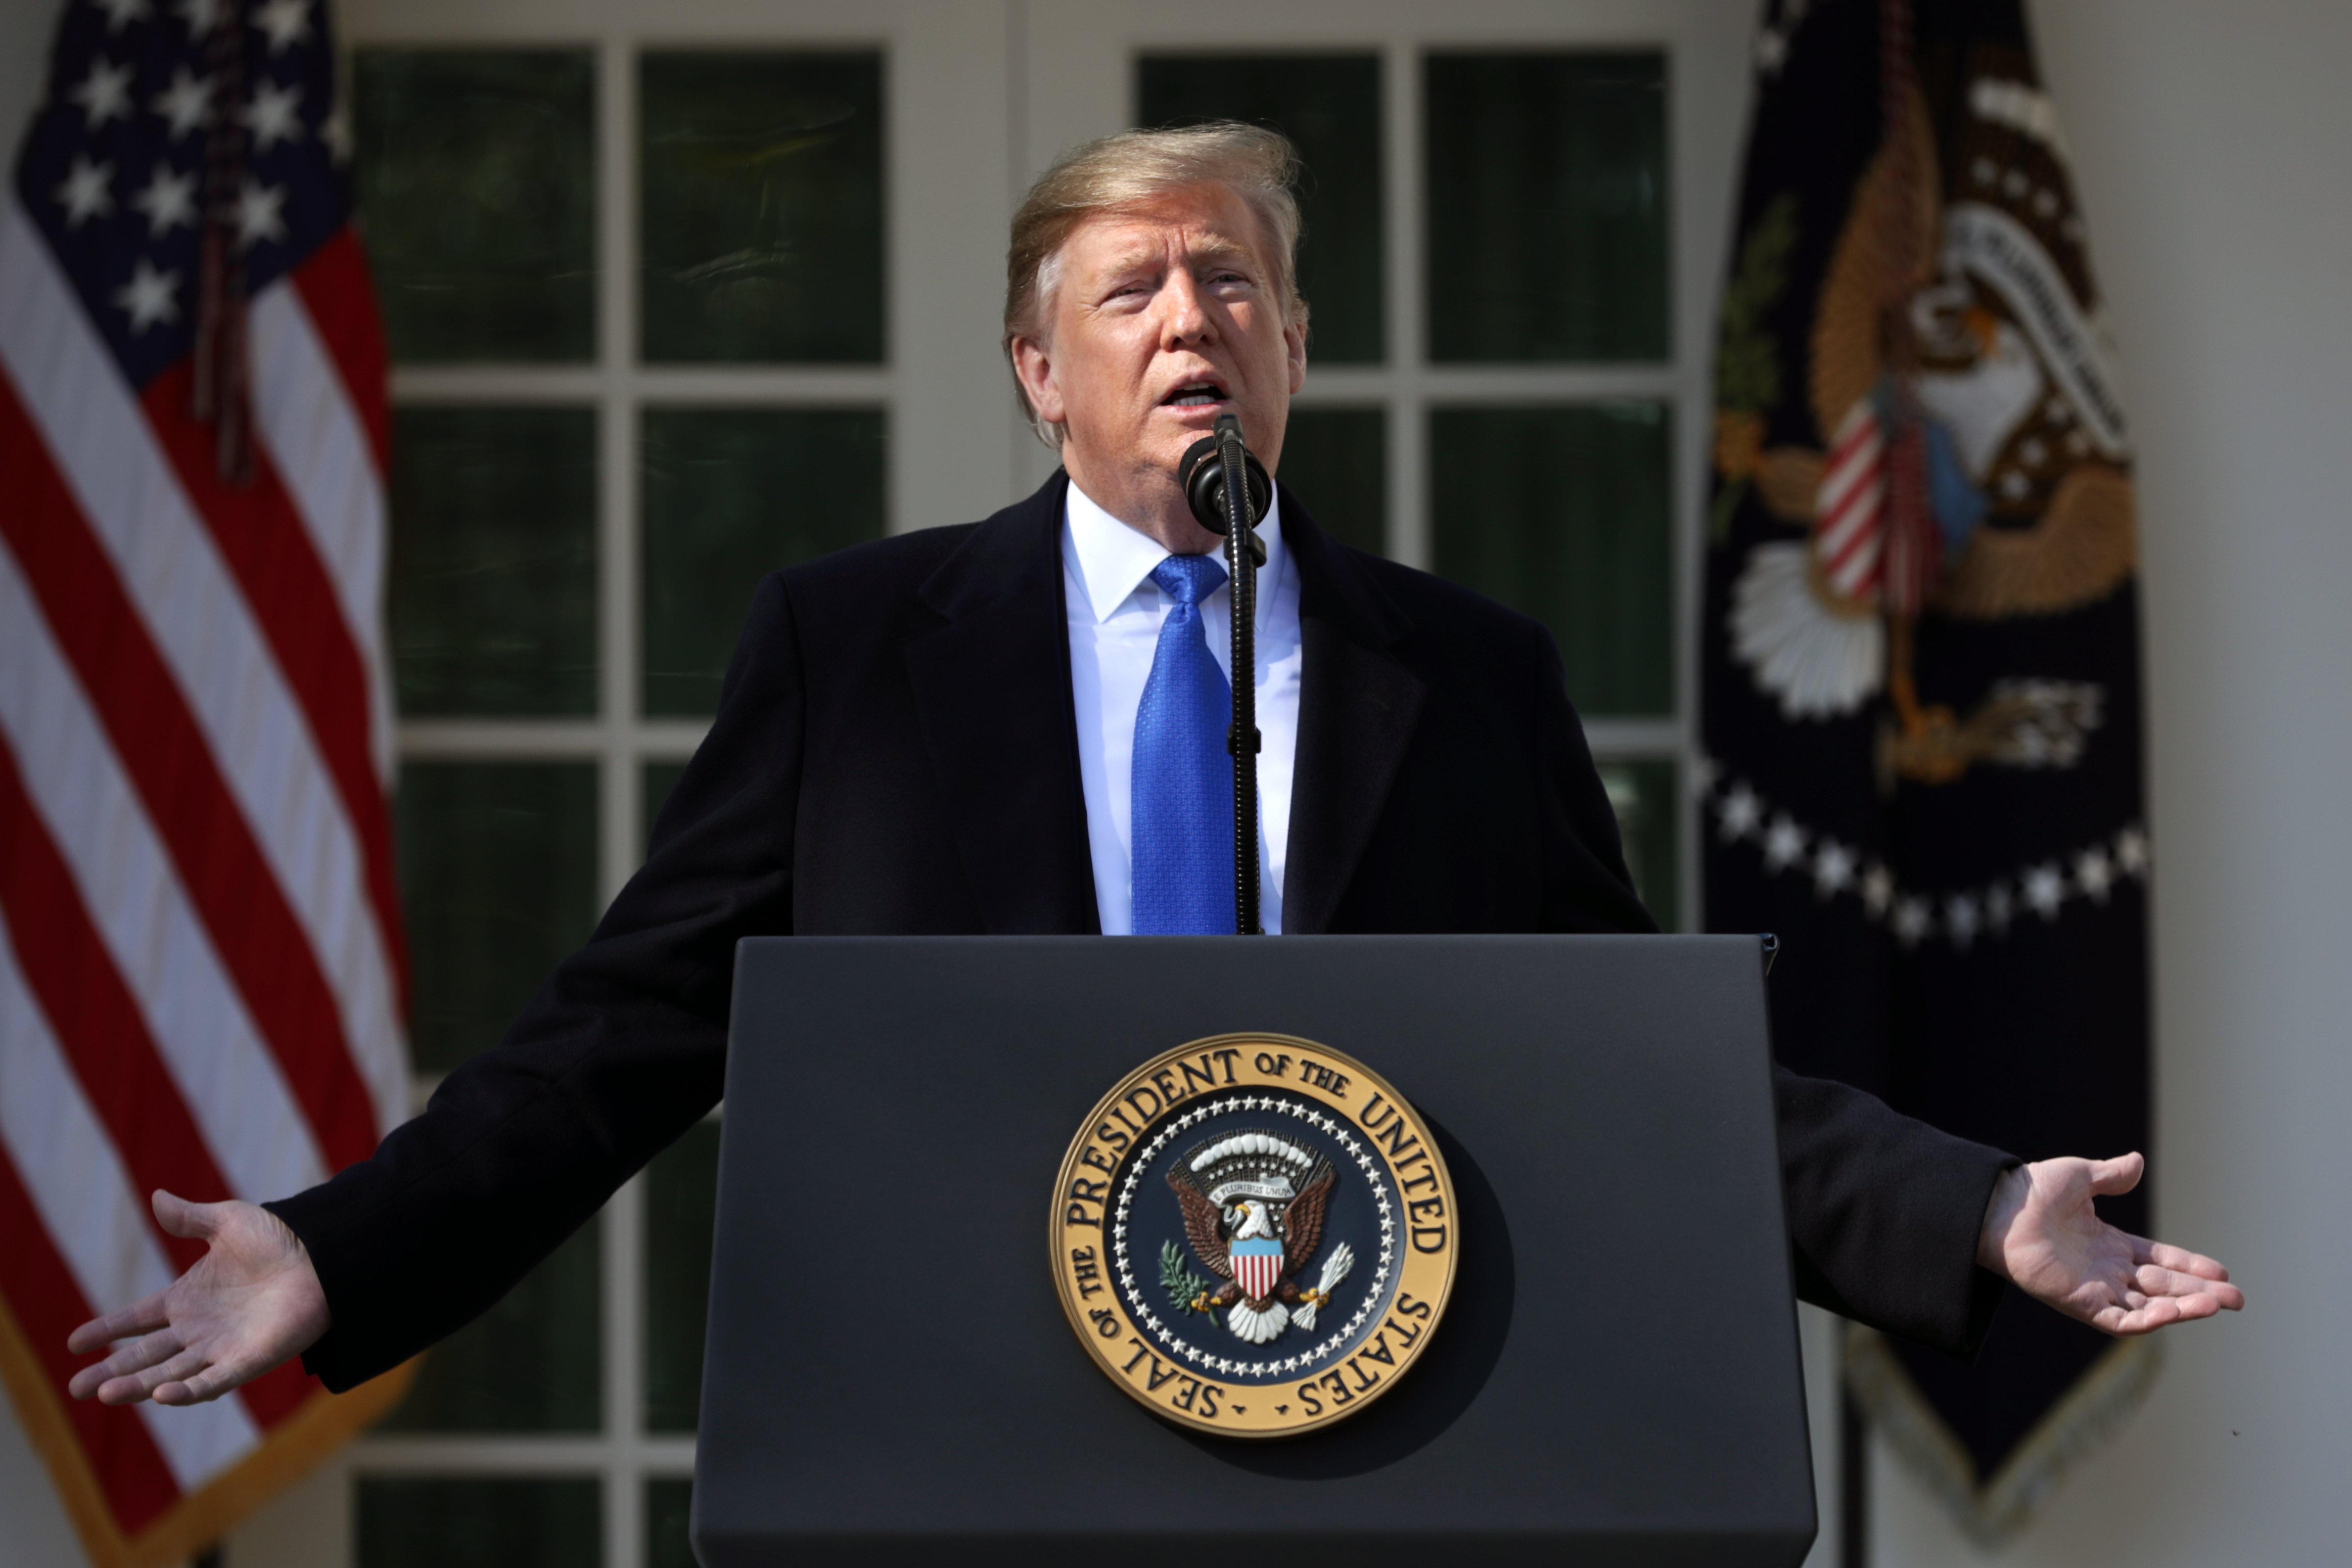 President Donald Trump declaring a national emergency at the White House | Photo: Getty Images